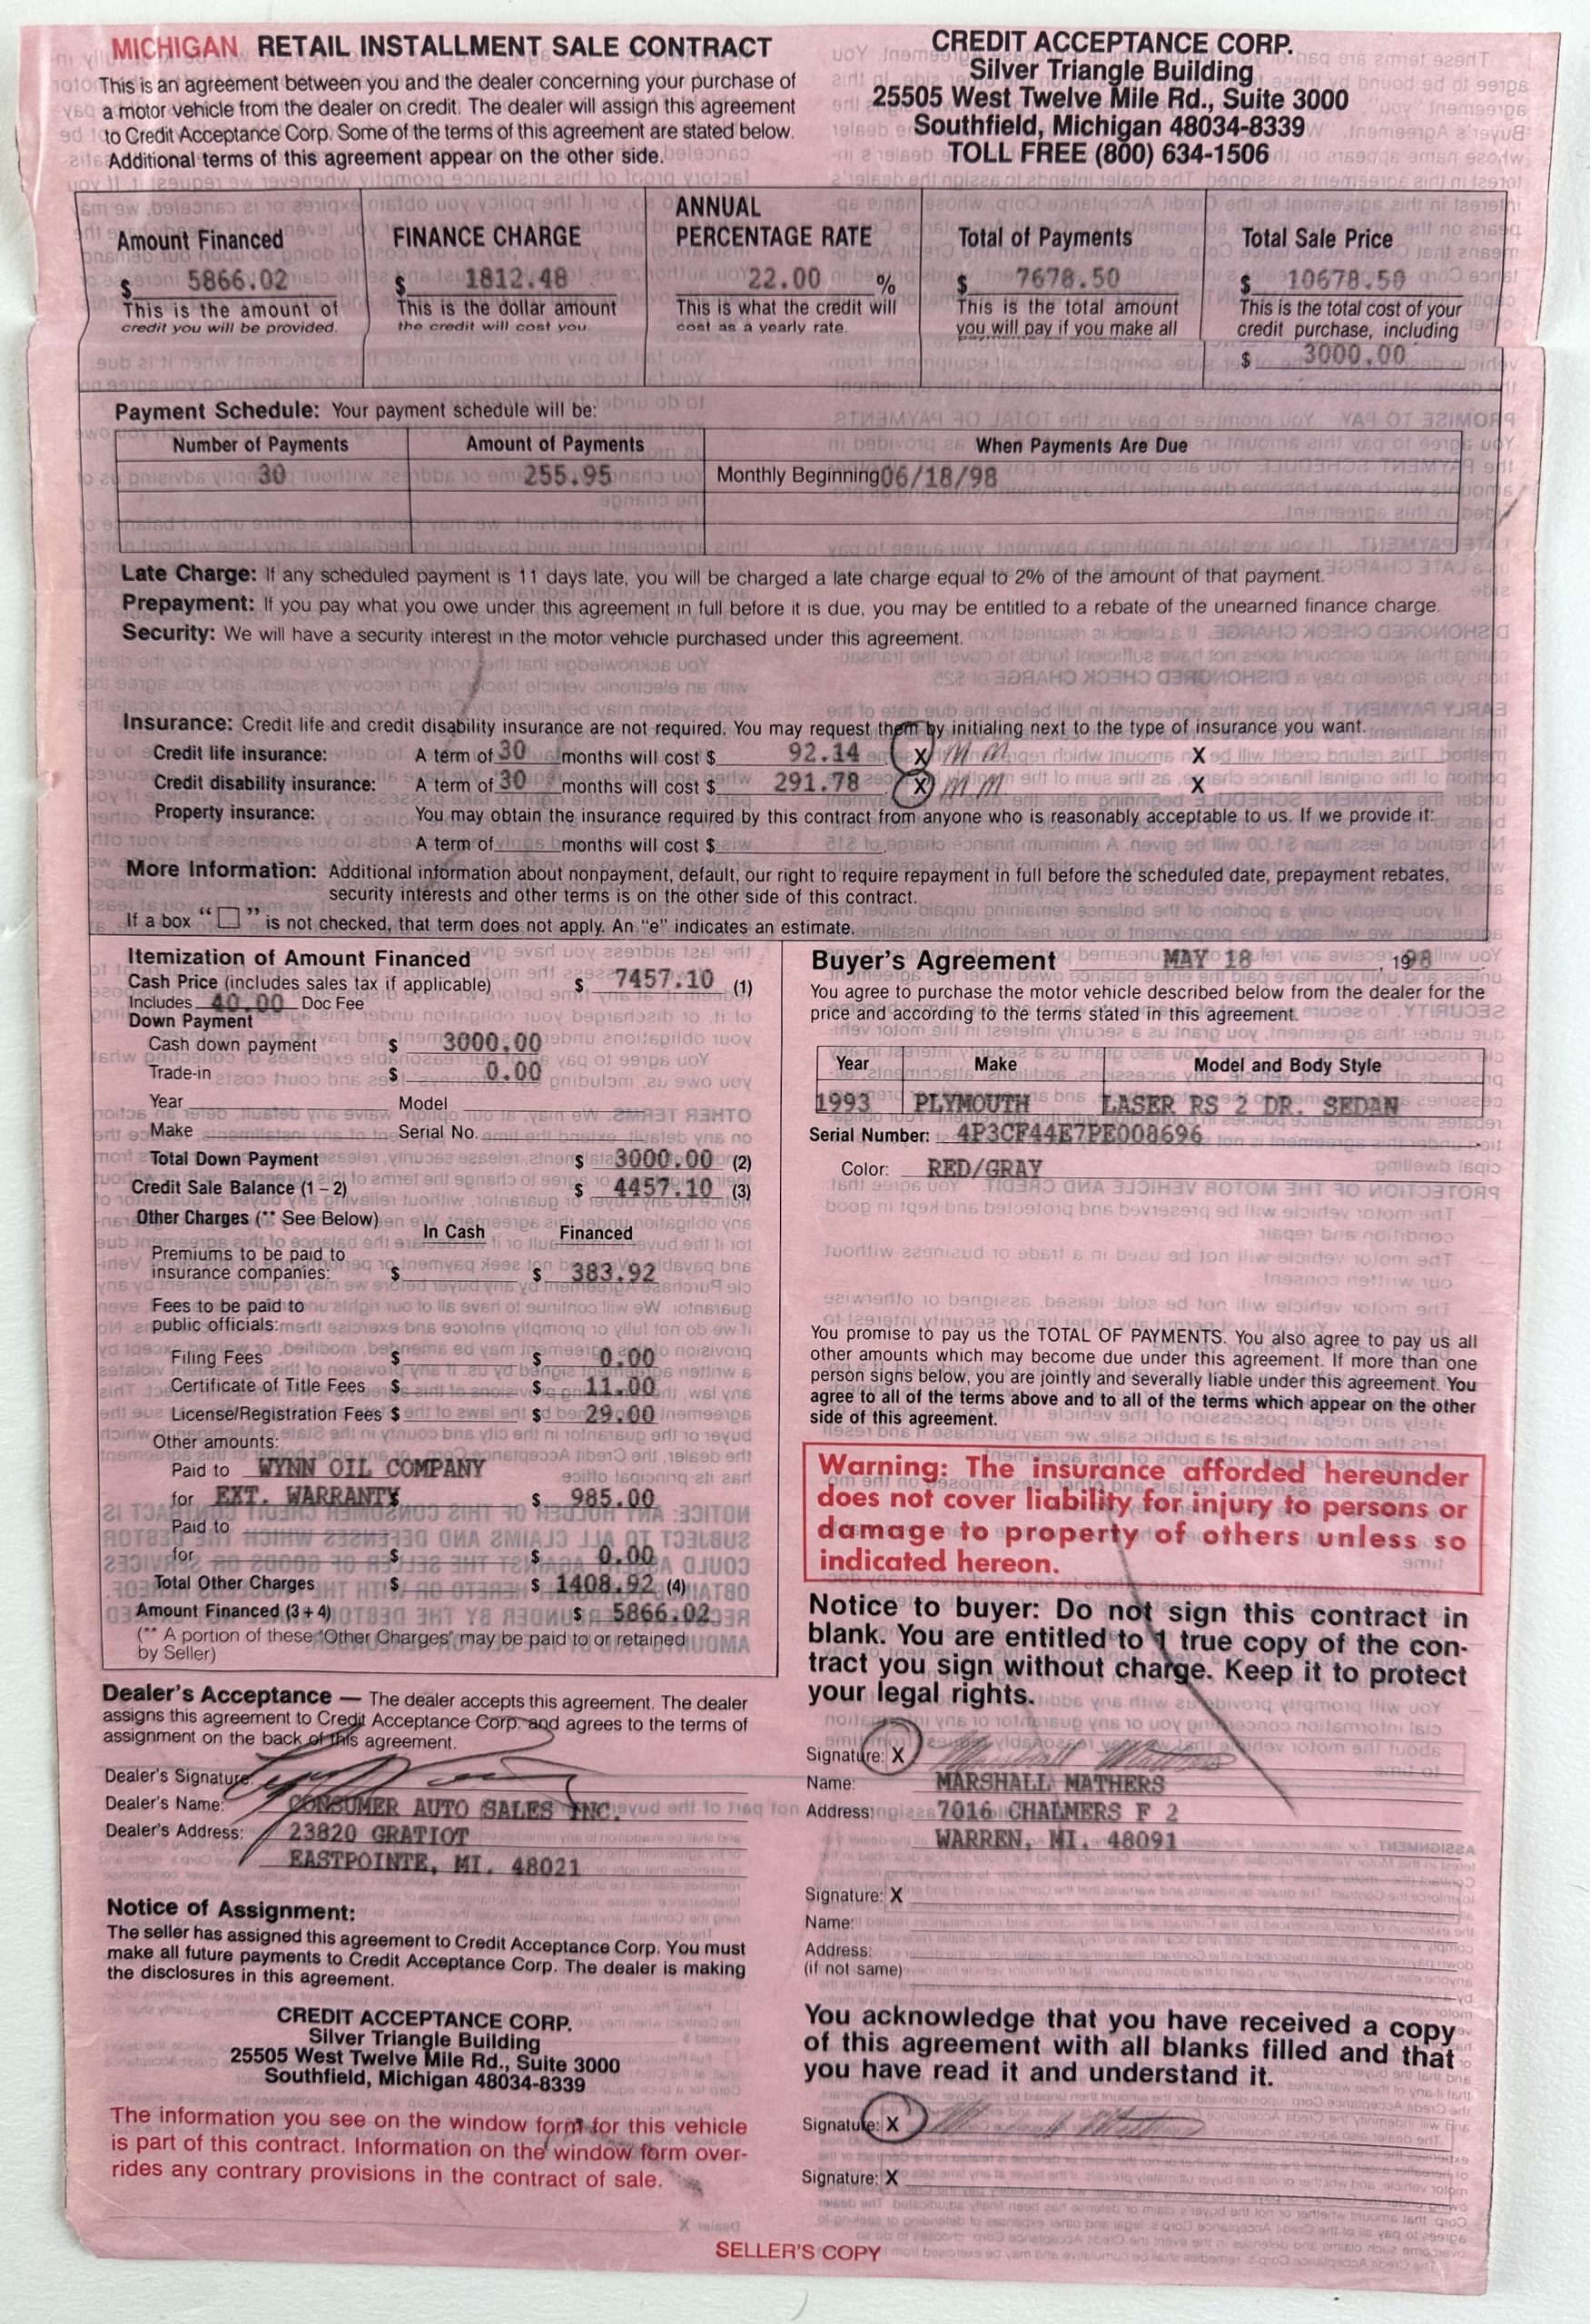 The Amazing Music Auction Is Selling Eminem-Signed 1998 Car Purchase Documents